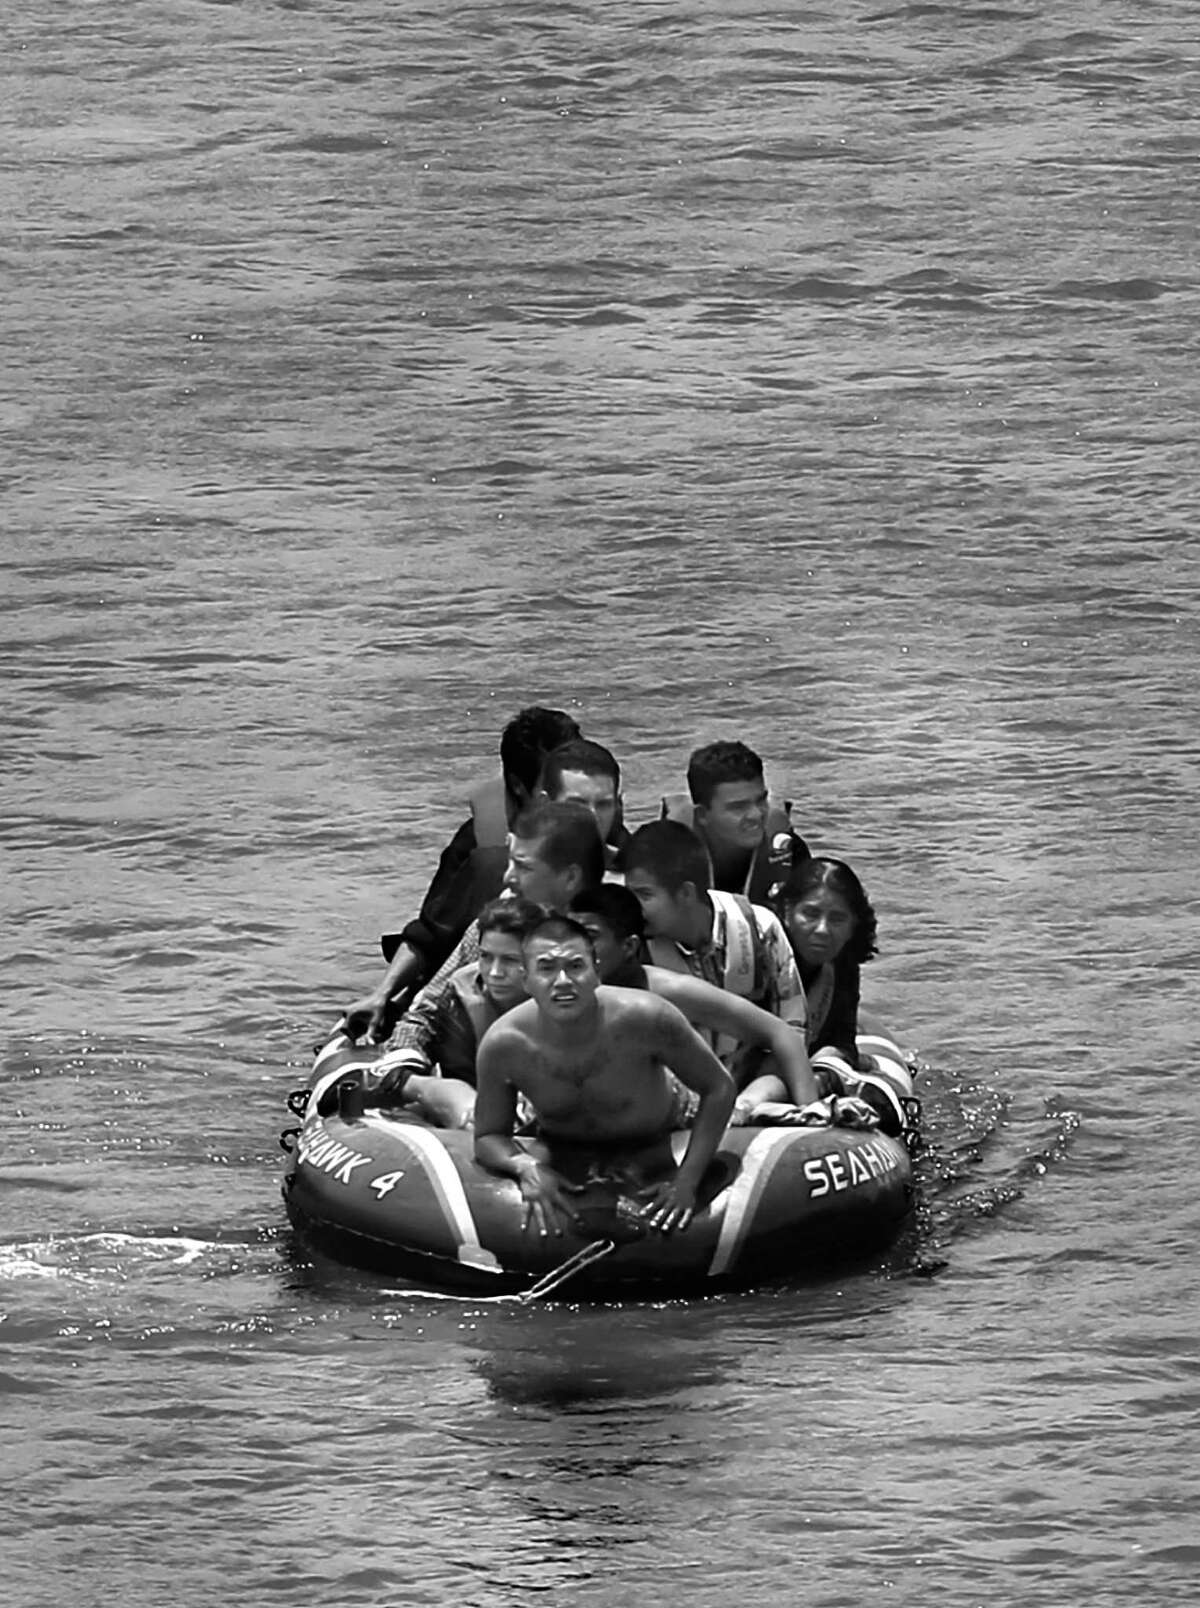 JUNE 24, 2014, 2:02 PM, ROMA, TEXAS - Using an inflatable raft, coyotes, or smugglers, carry immigrants across by the international bridge on the Rio Grande in Roma, Texas. According to law enforcement officials, higher risk smuggling operations have moved into Starr County in order to avoid the saturated border in Hidalgo, County.